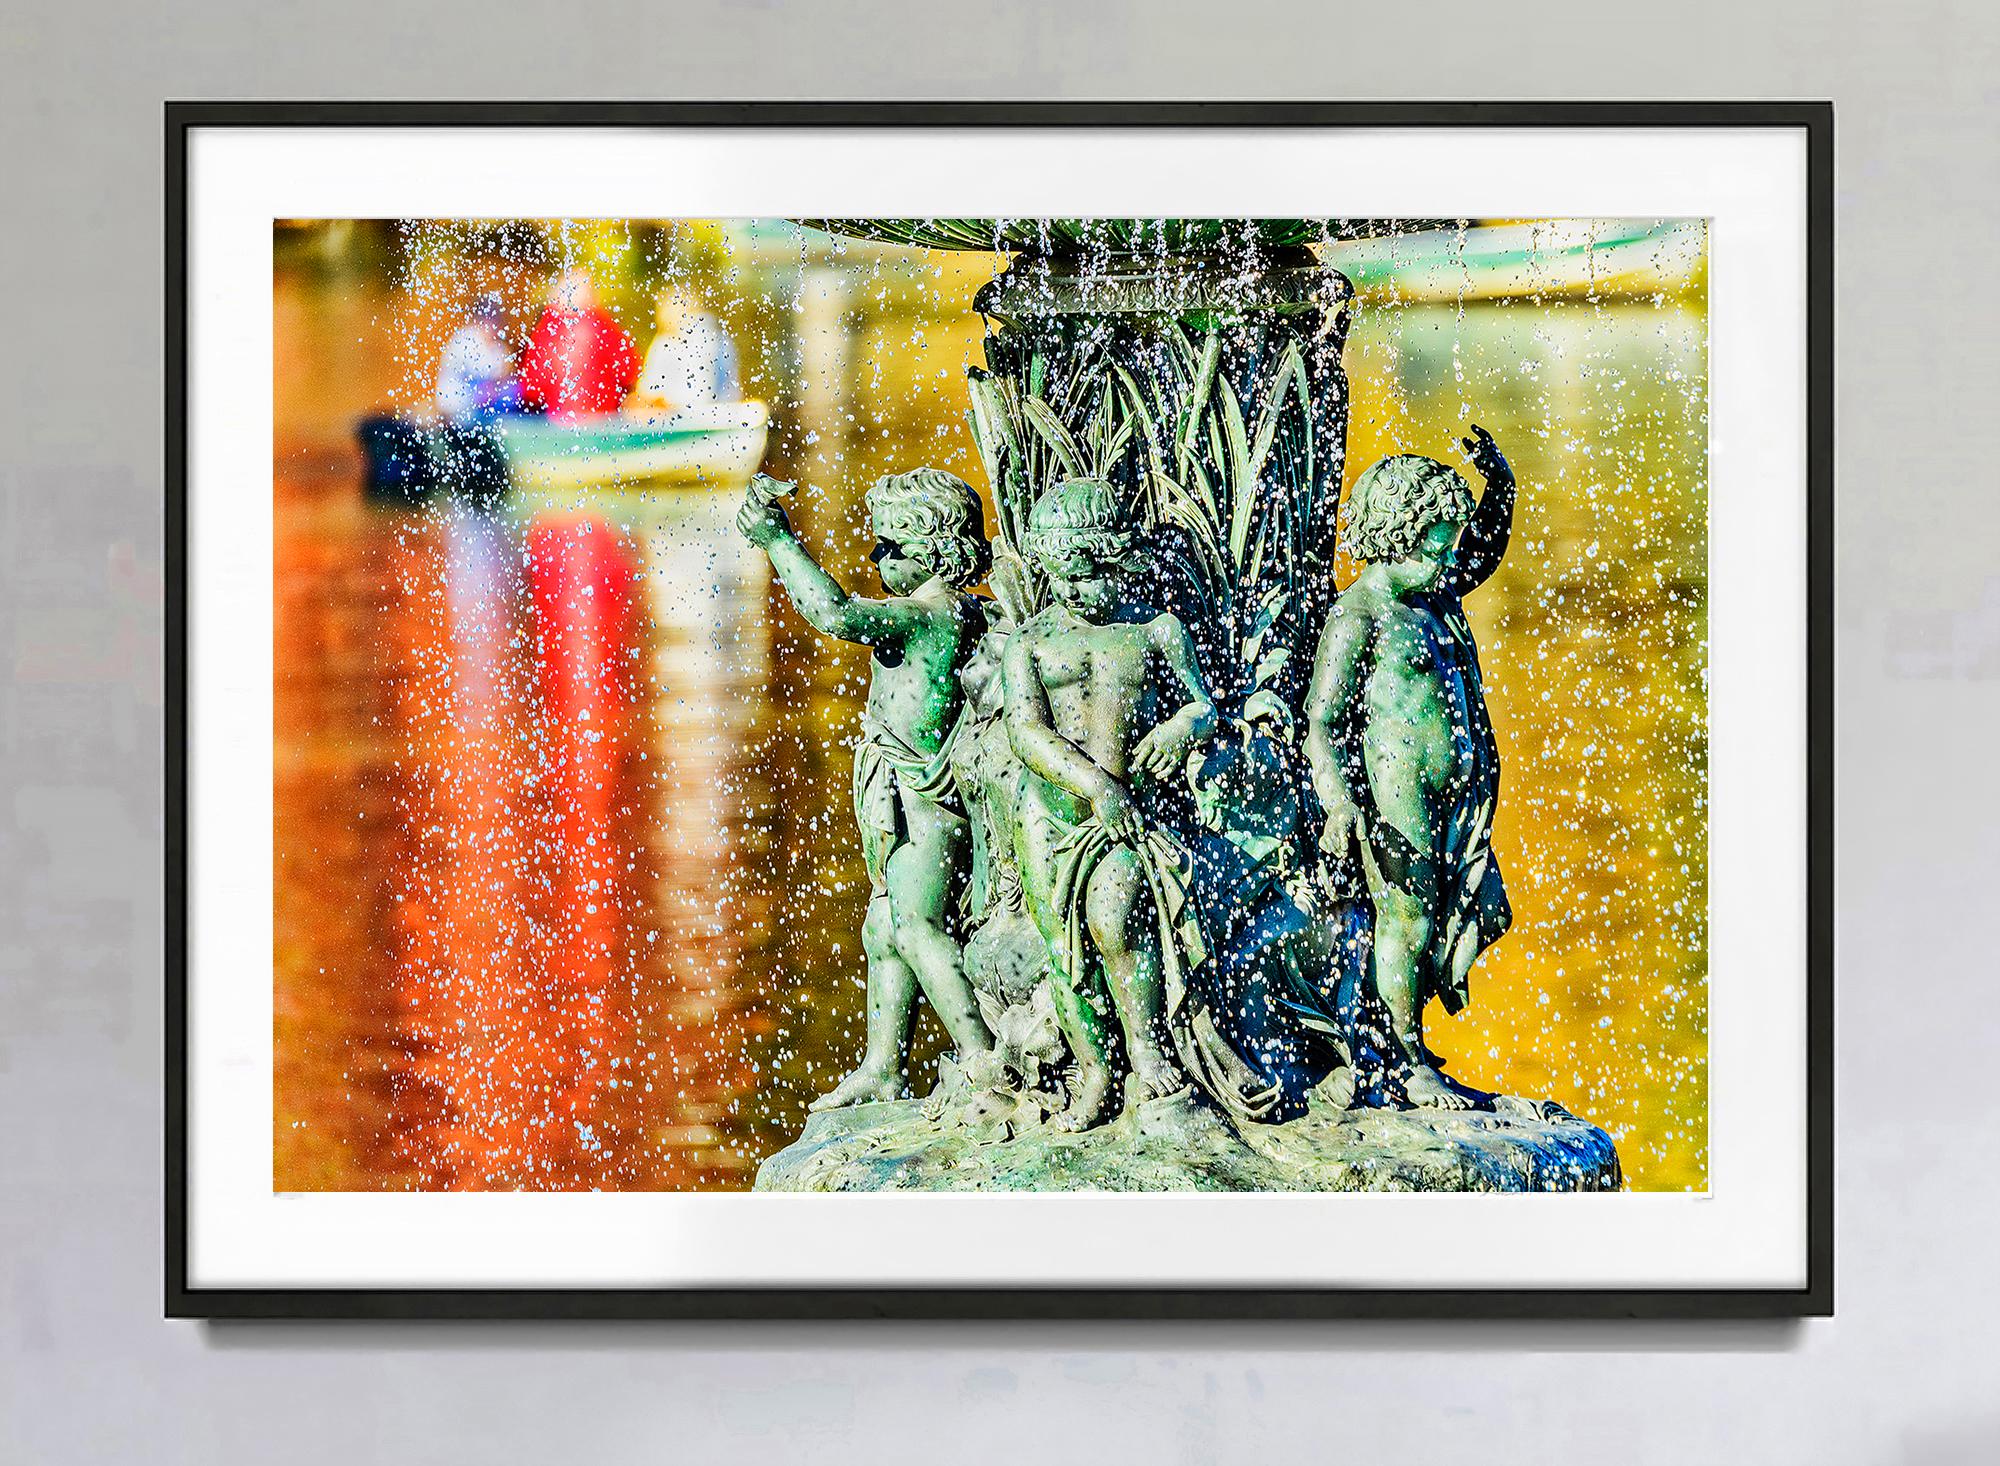 Romantic Bethesda Fountain with Angel of the Waters Bronze Statue Colorful Water - Photograph by Mitchell Funk